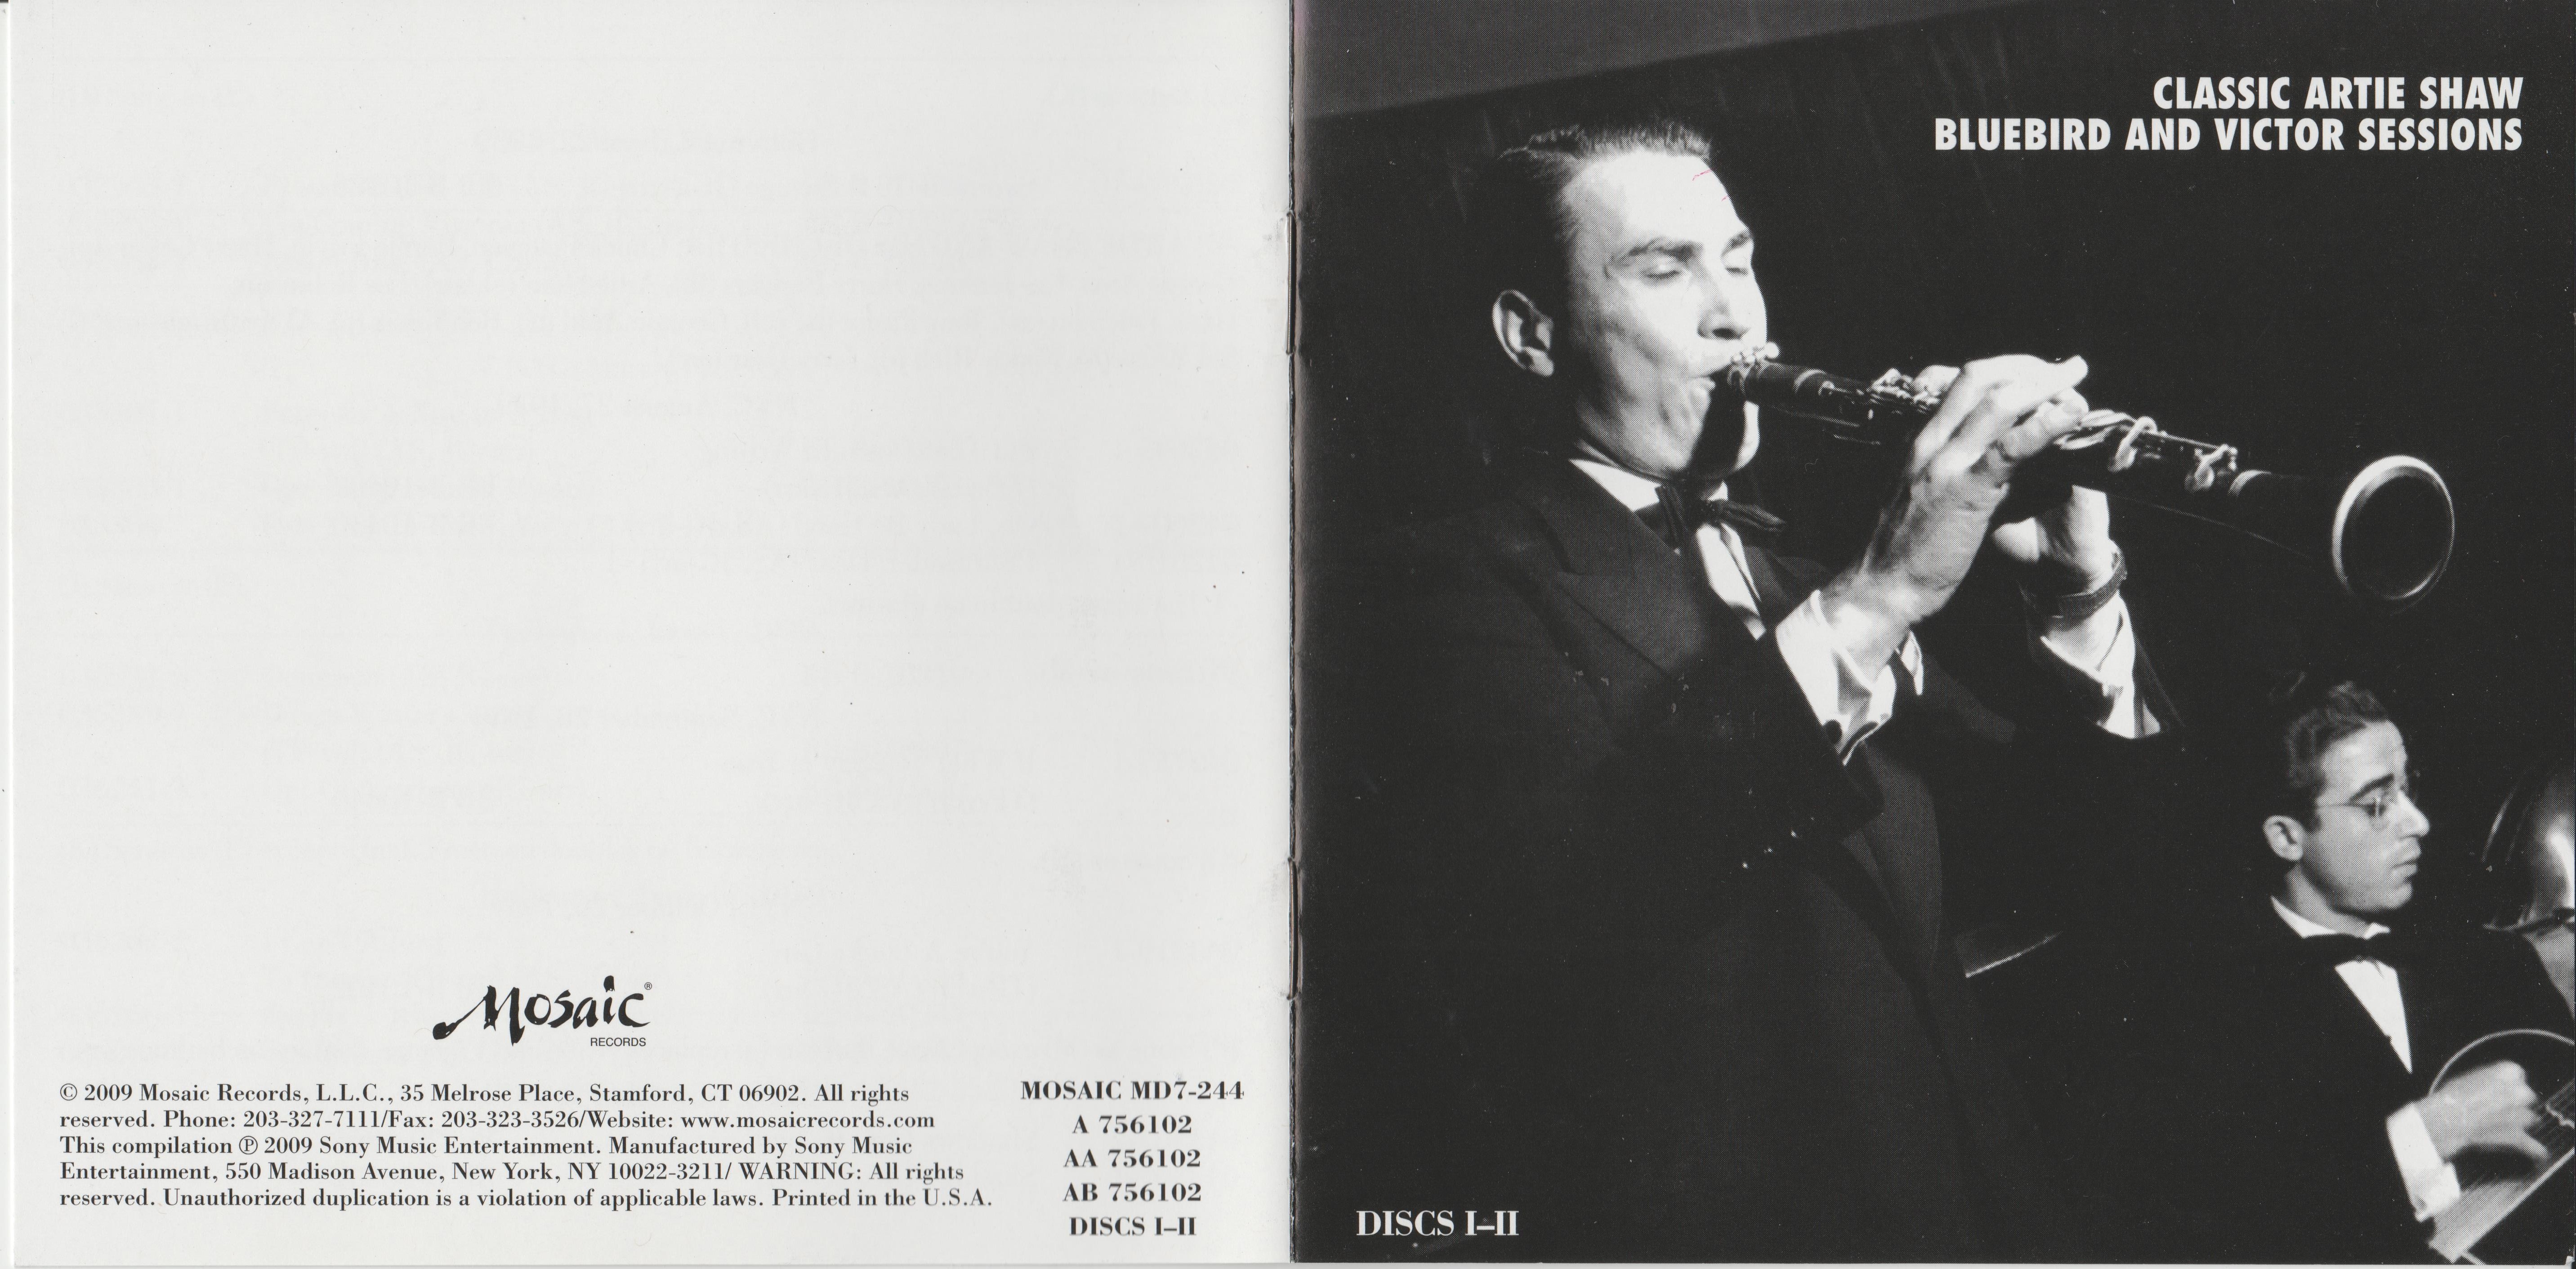 Artie Shaw - 2009 Classic Artie Shaw Bluebird And Victor Sessions 7c